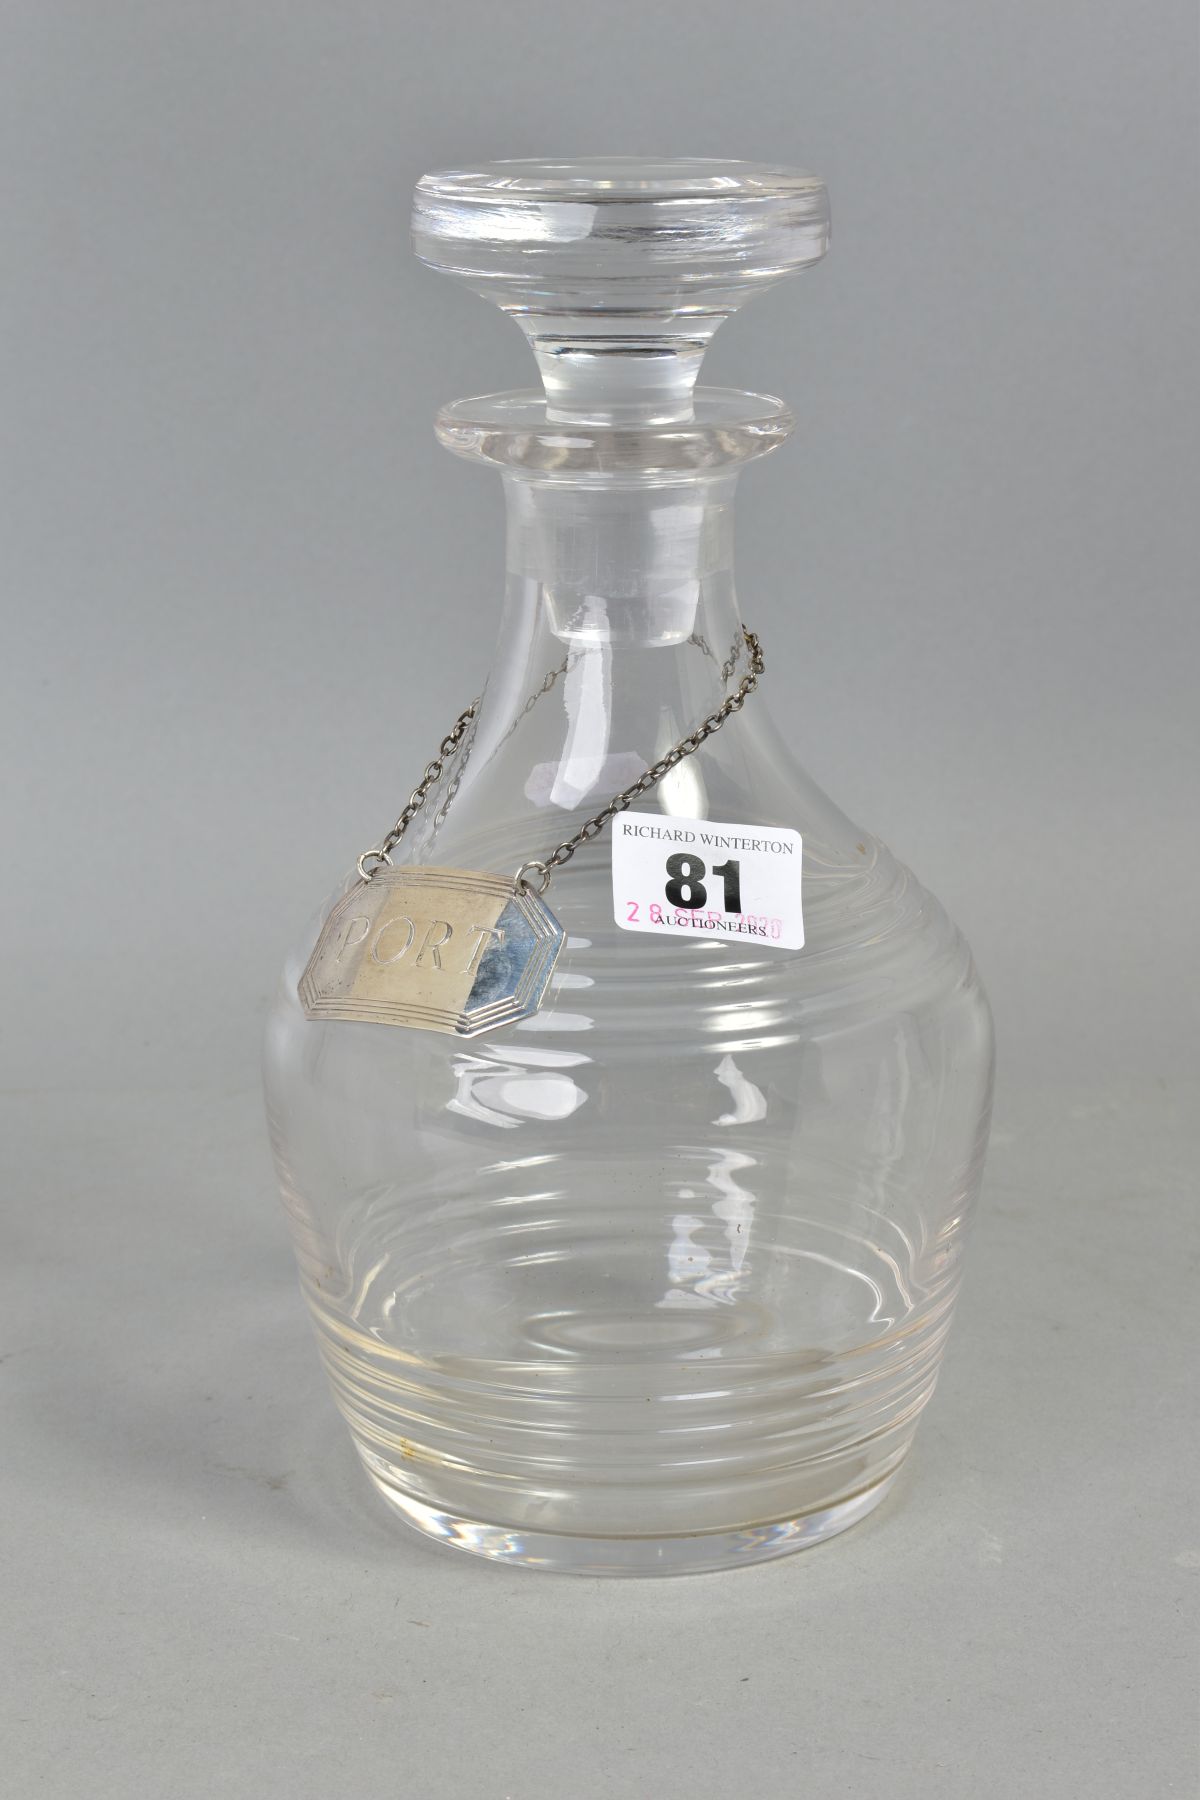 A GLASS DECANTER AND SILVER LABEL, glass decanter with stopper, height approximately 22cm,